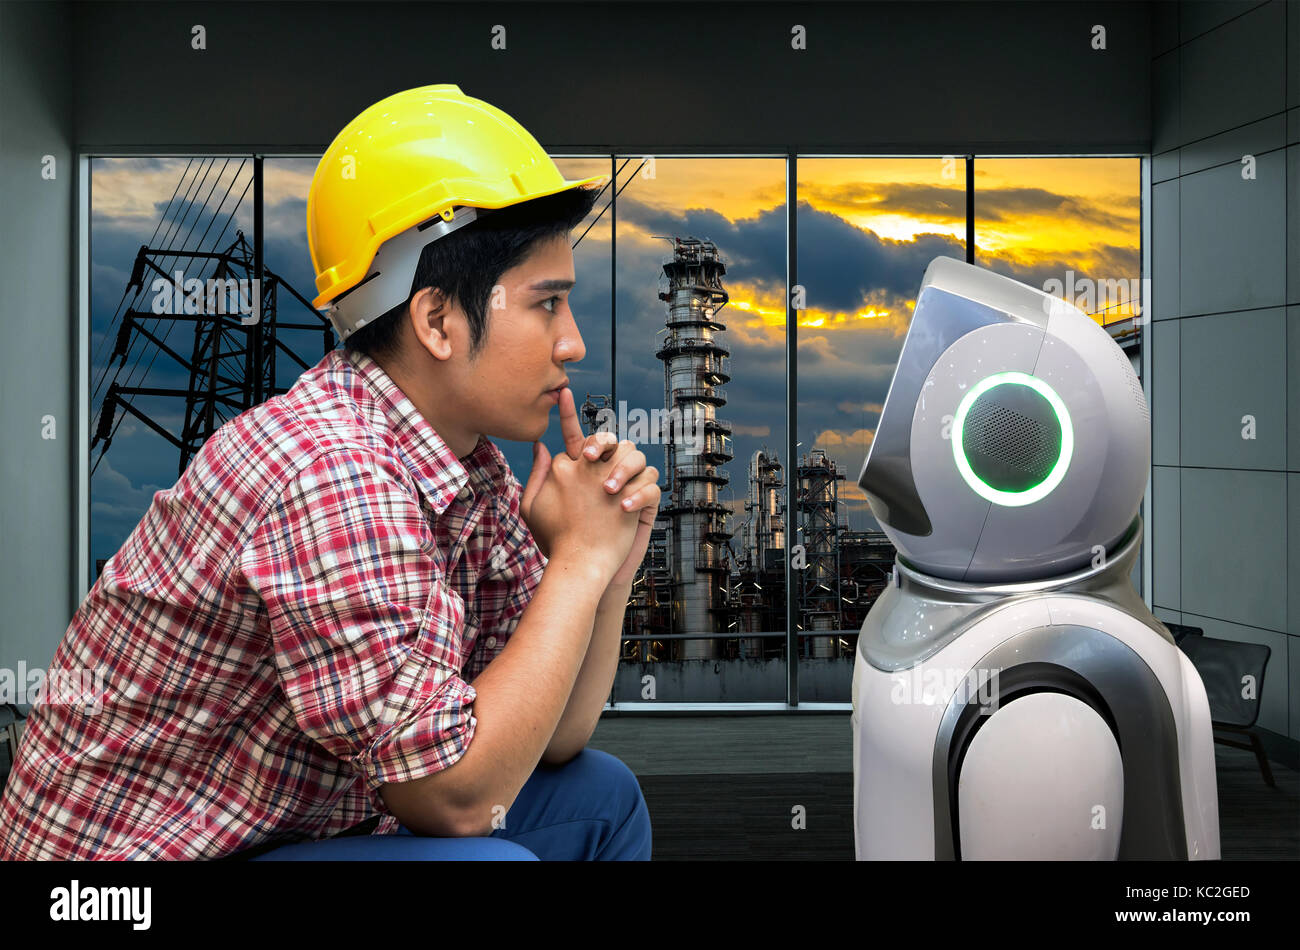 Industry 4.0 technology manufacturing production machine , robo advisor concept. Human and service artificial intelligence robot in smart factory. Stock Photo